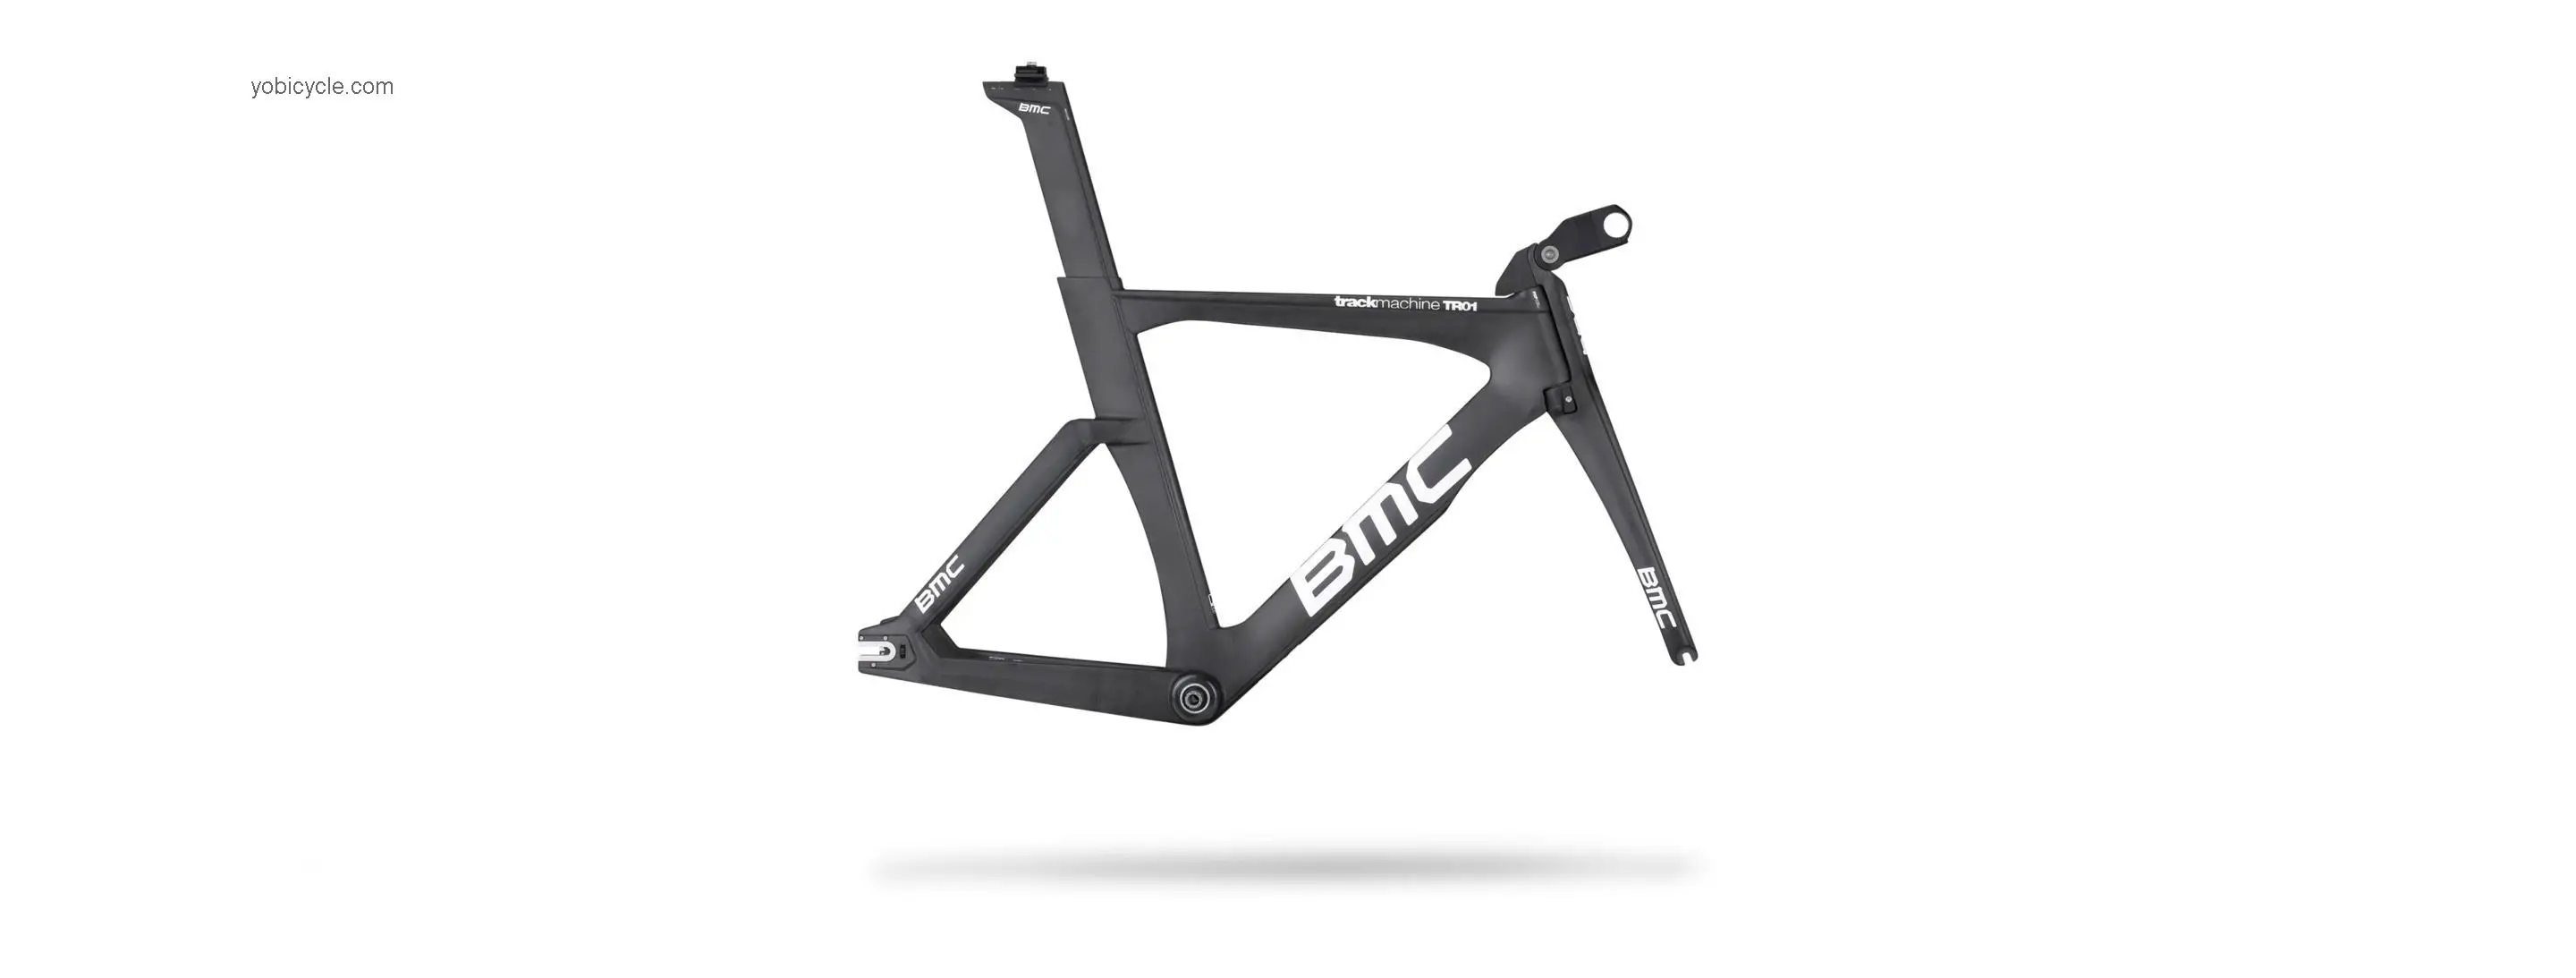 BMC  Trackmachine TR01 Frameset Technical data and specifications